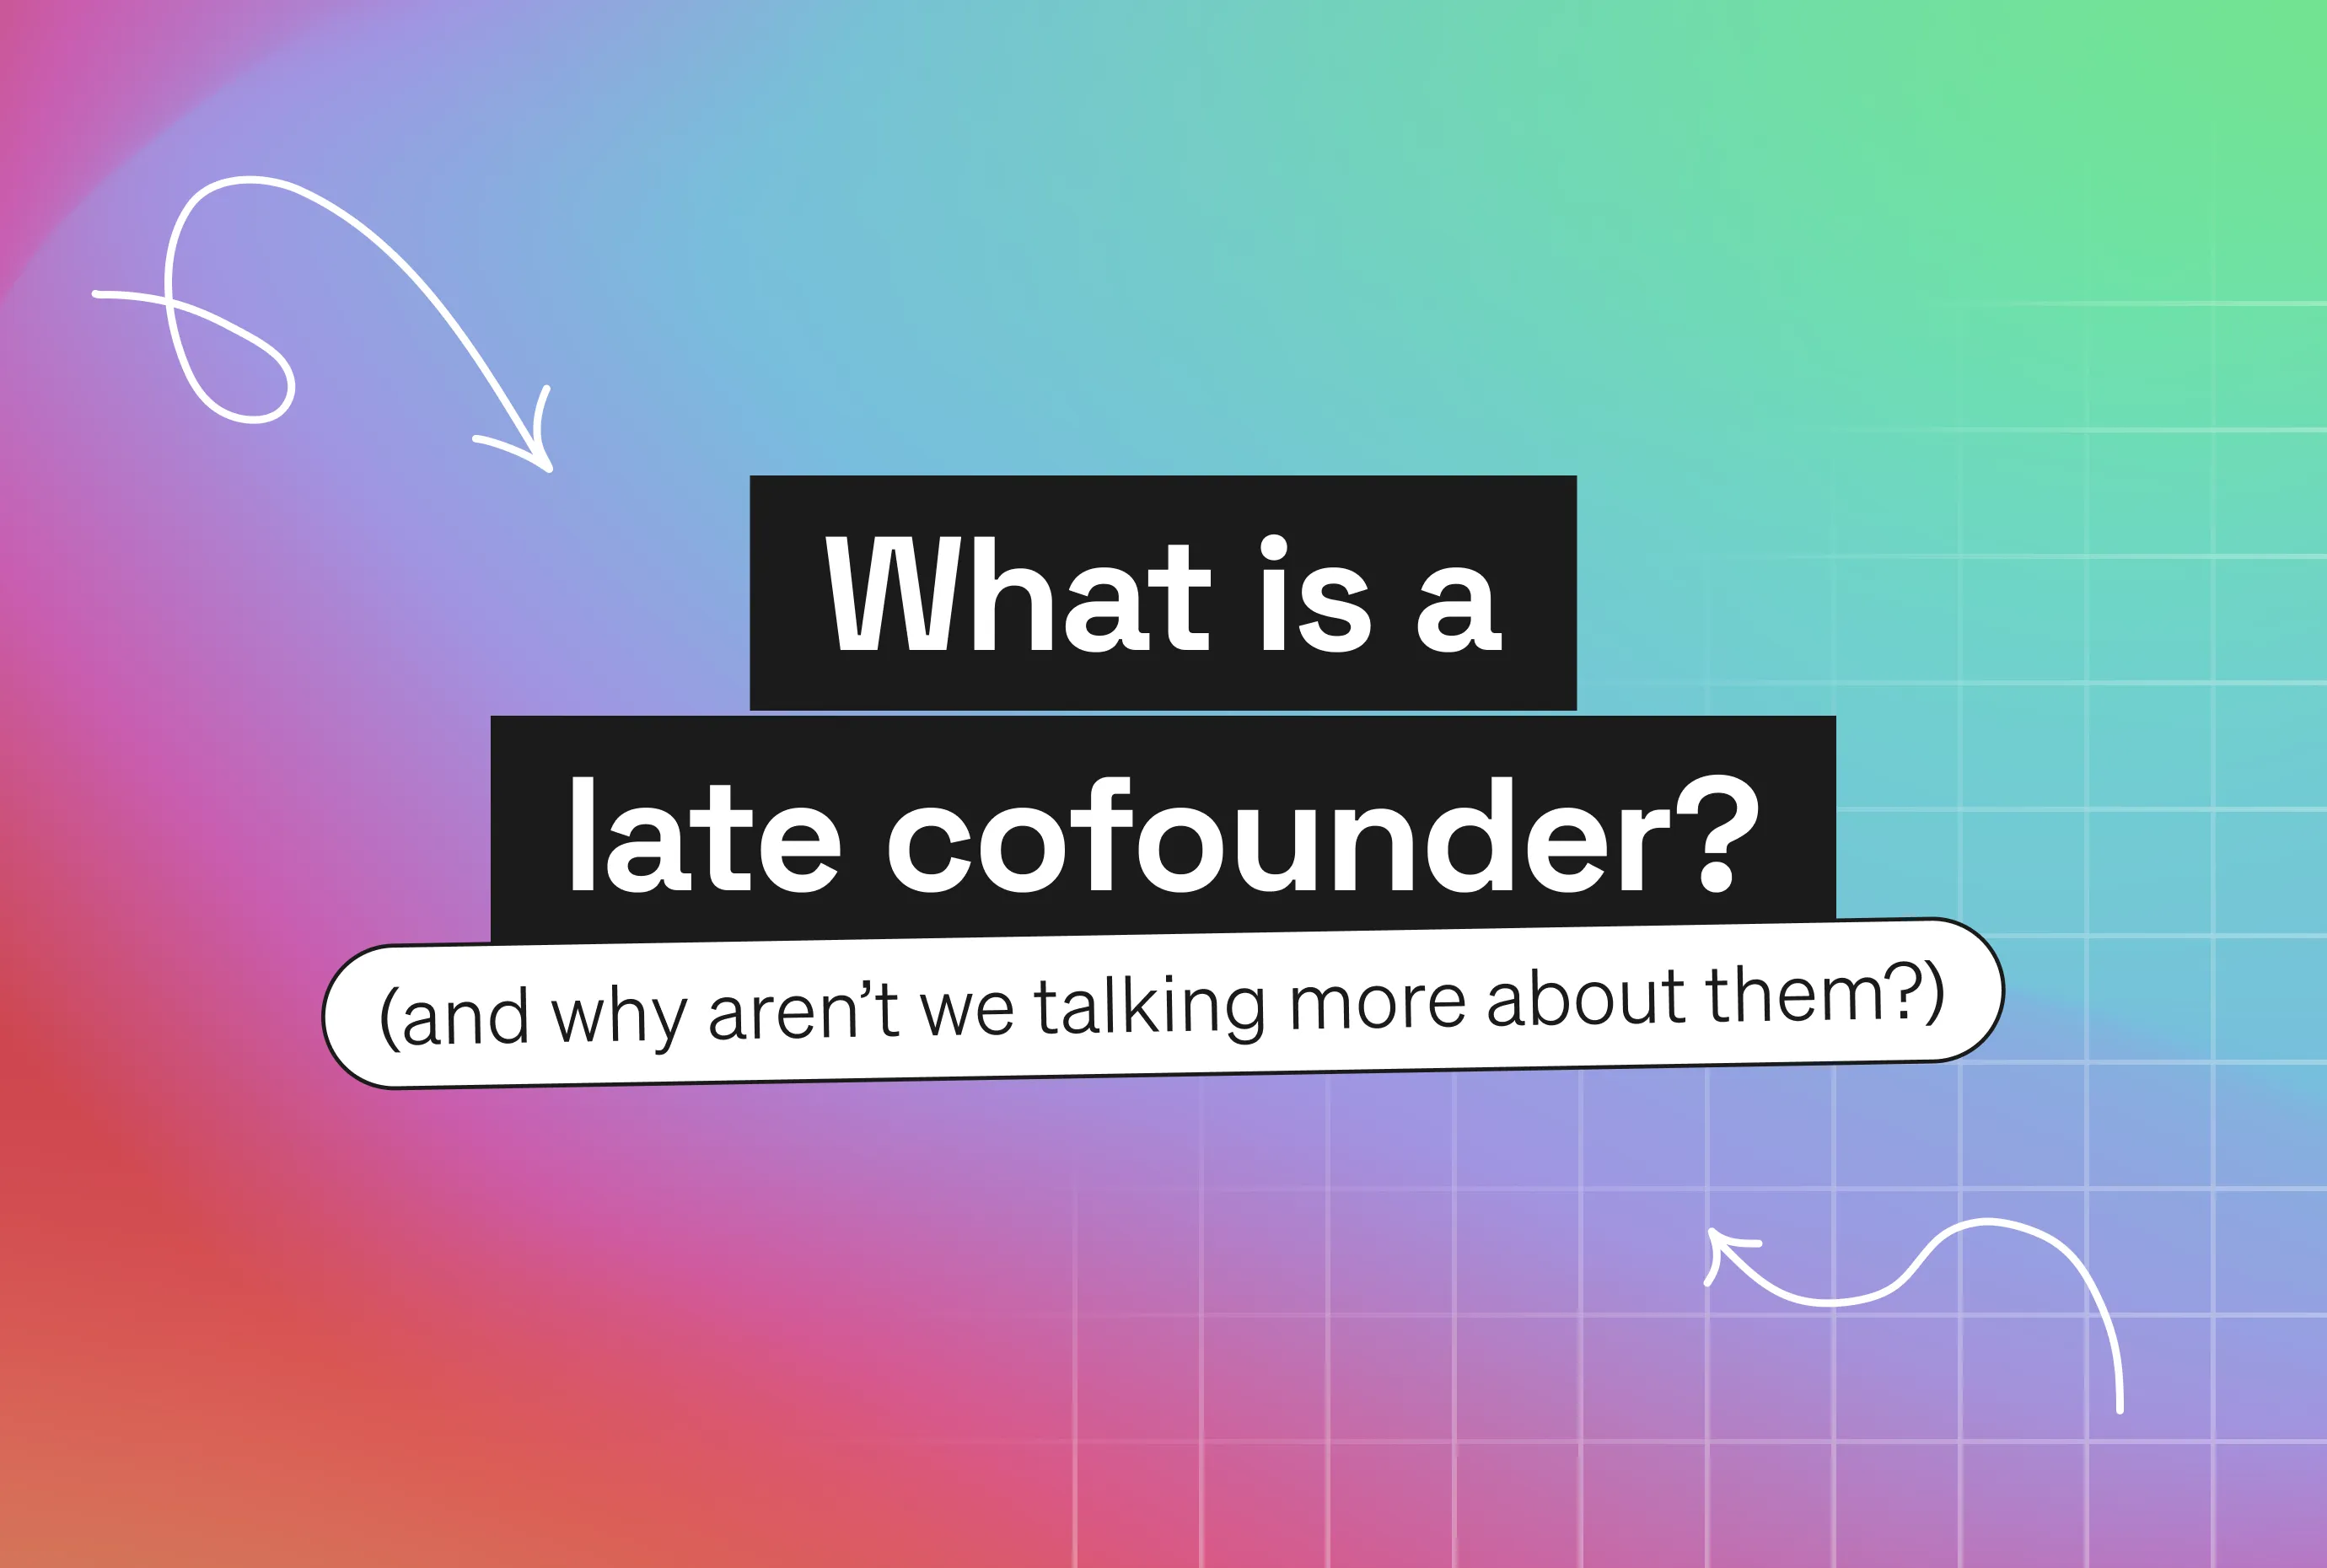 What is a late cofounder, and why aren’t we talking more about them?